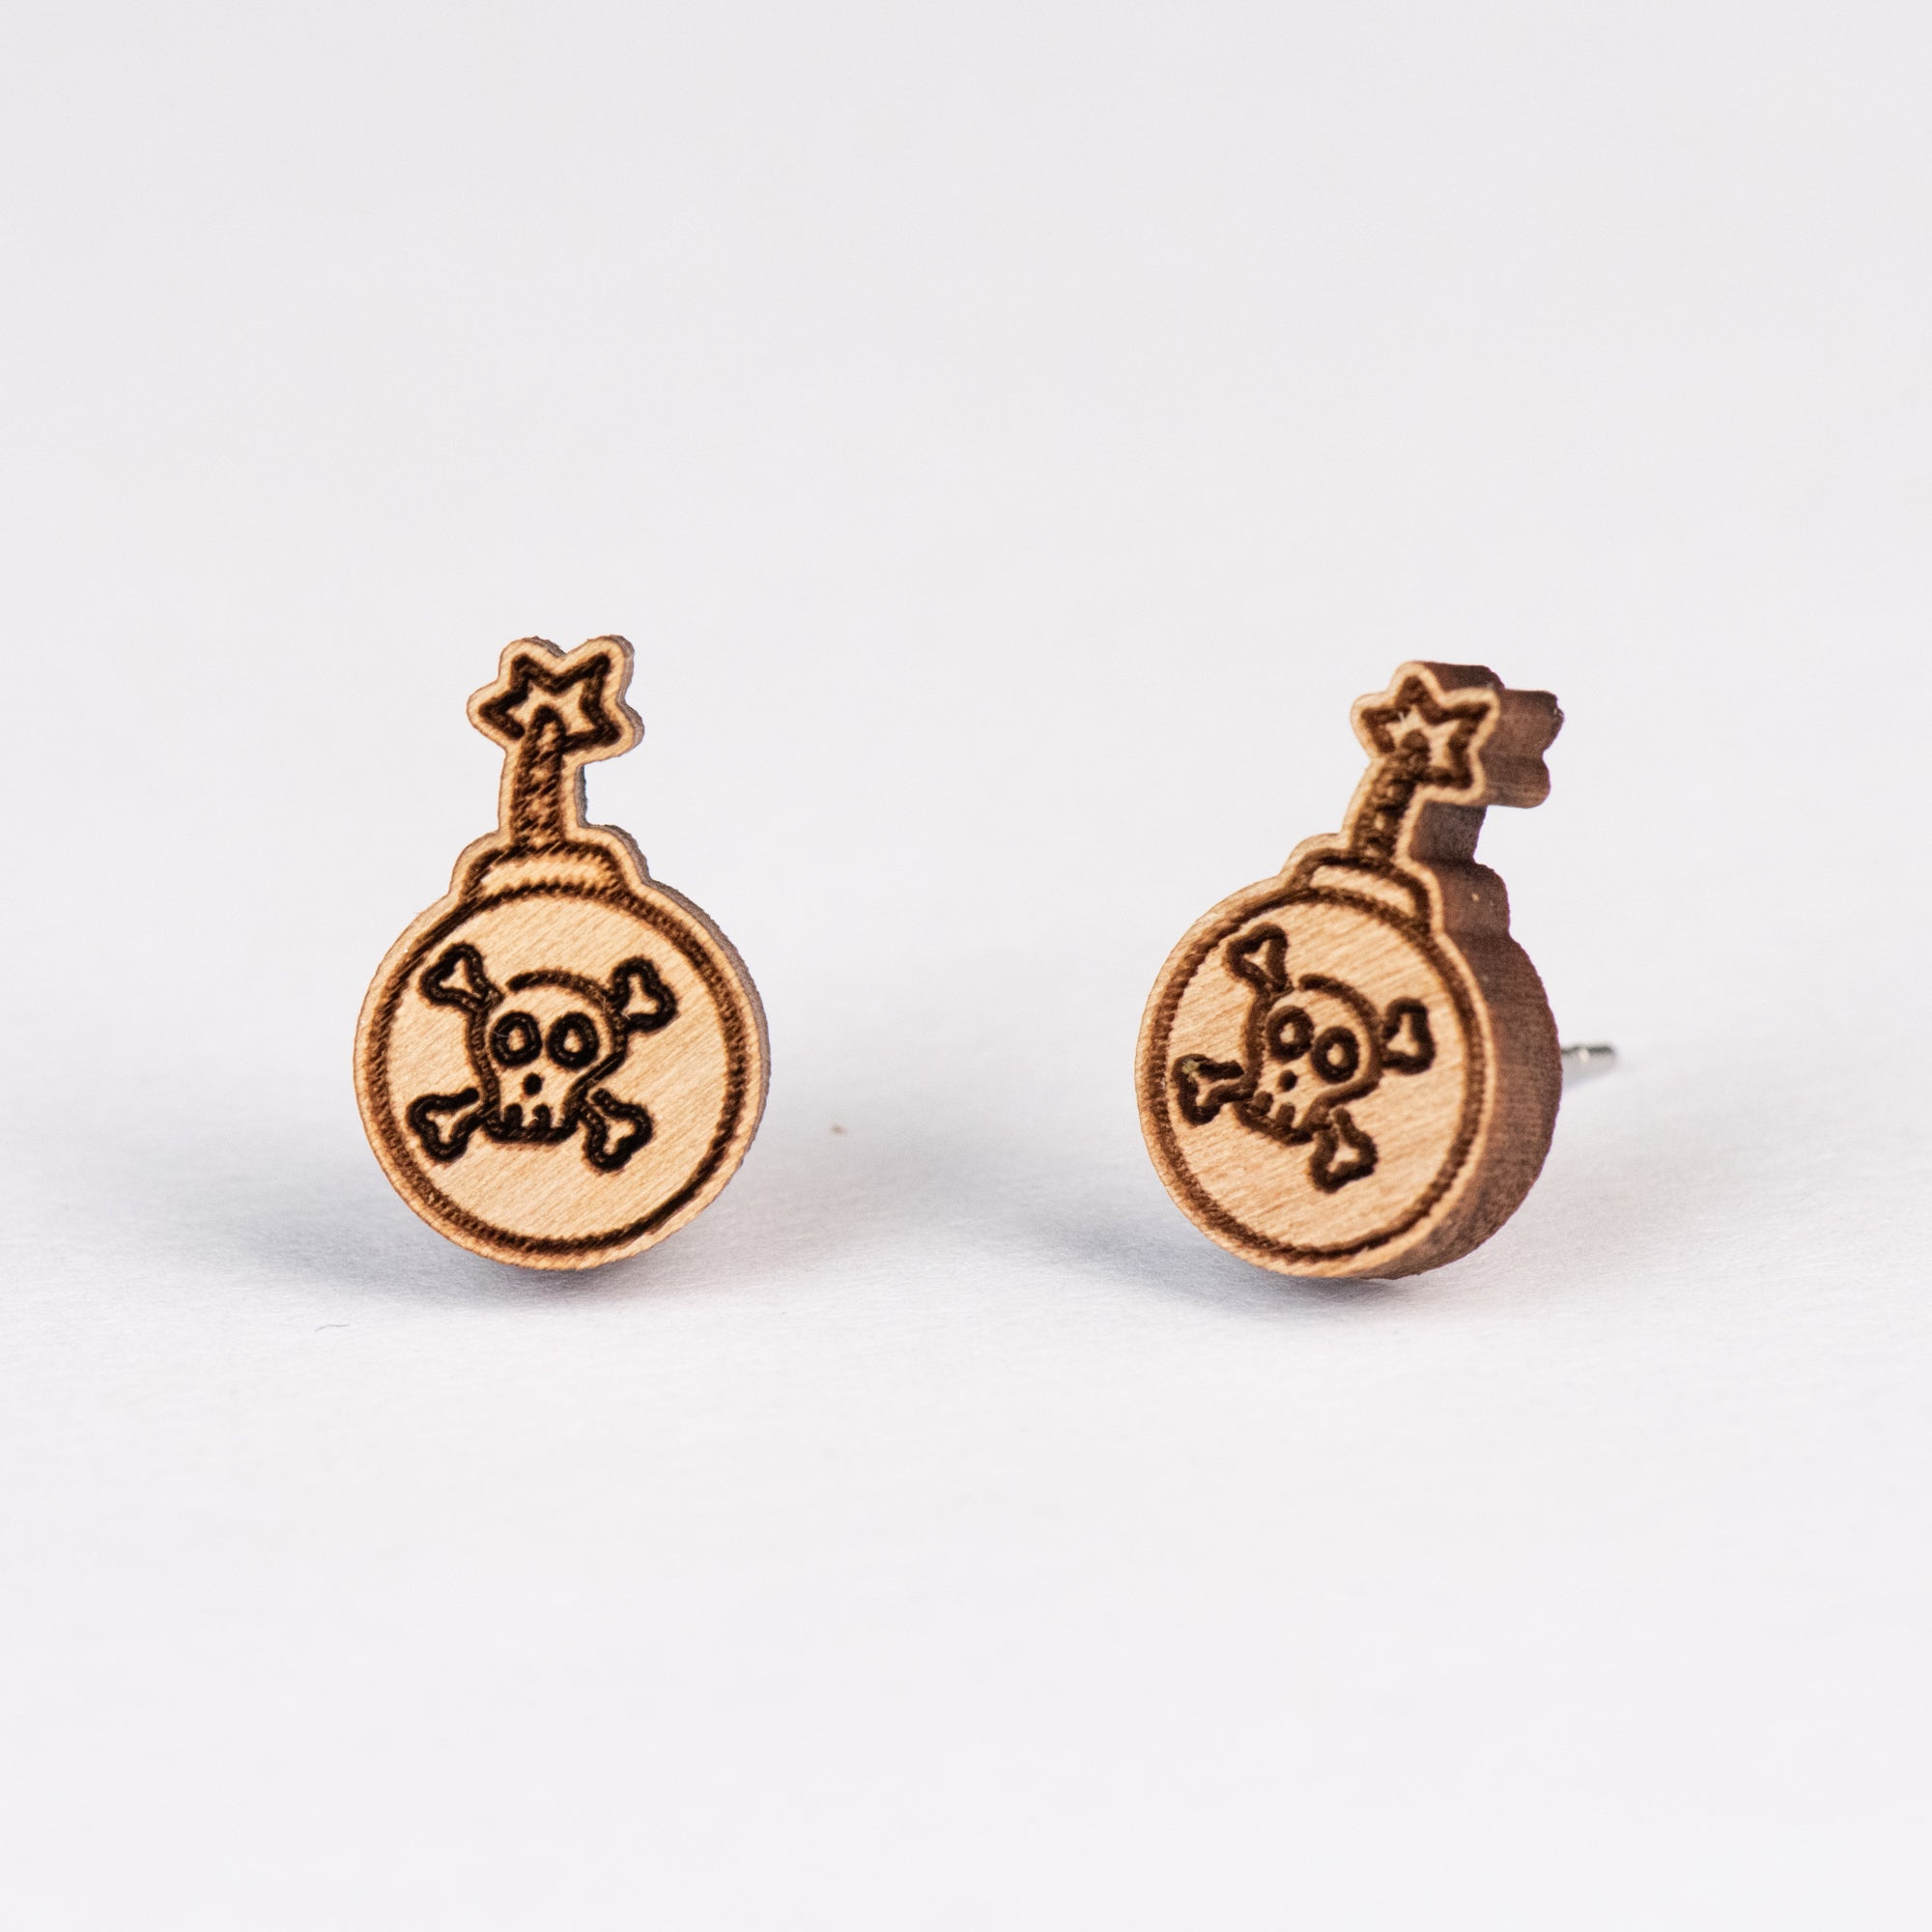 Pirate Skull Bomb Canon Ball Cherry Wood Stud Earrings - ET15044 - Robin Valley Official Store